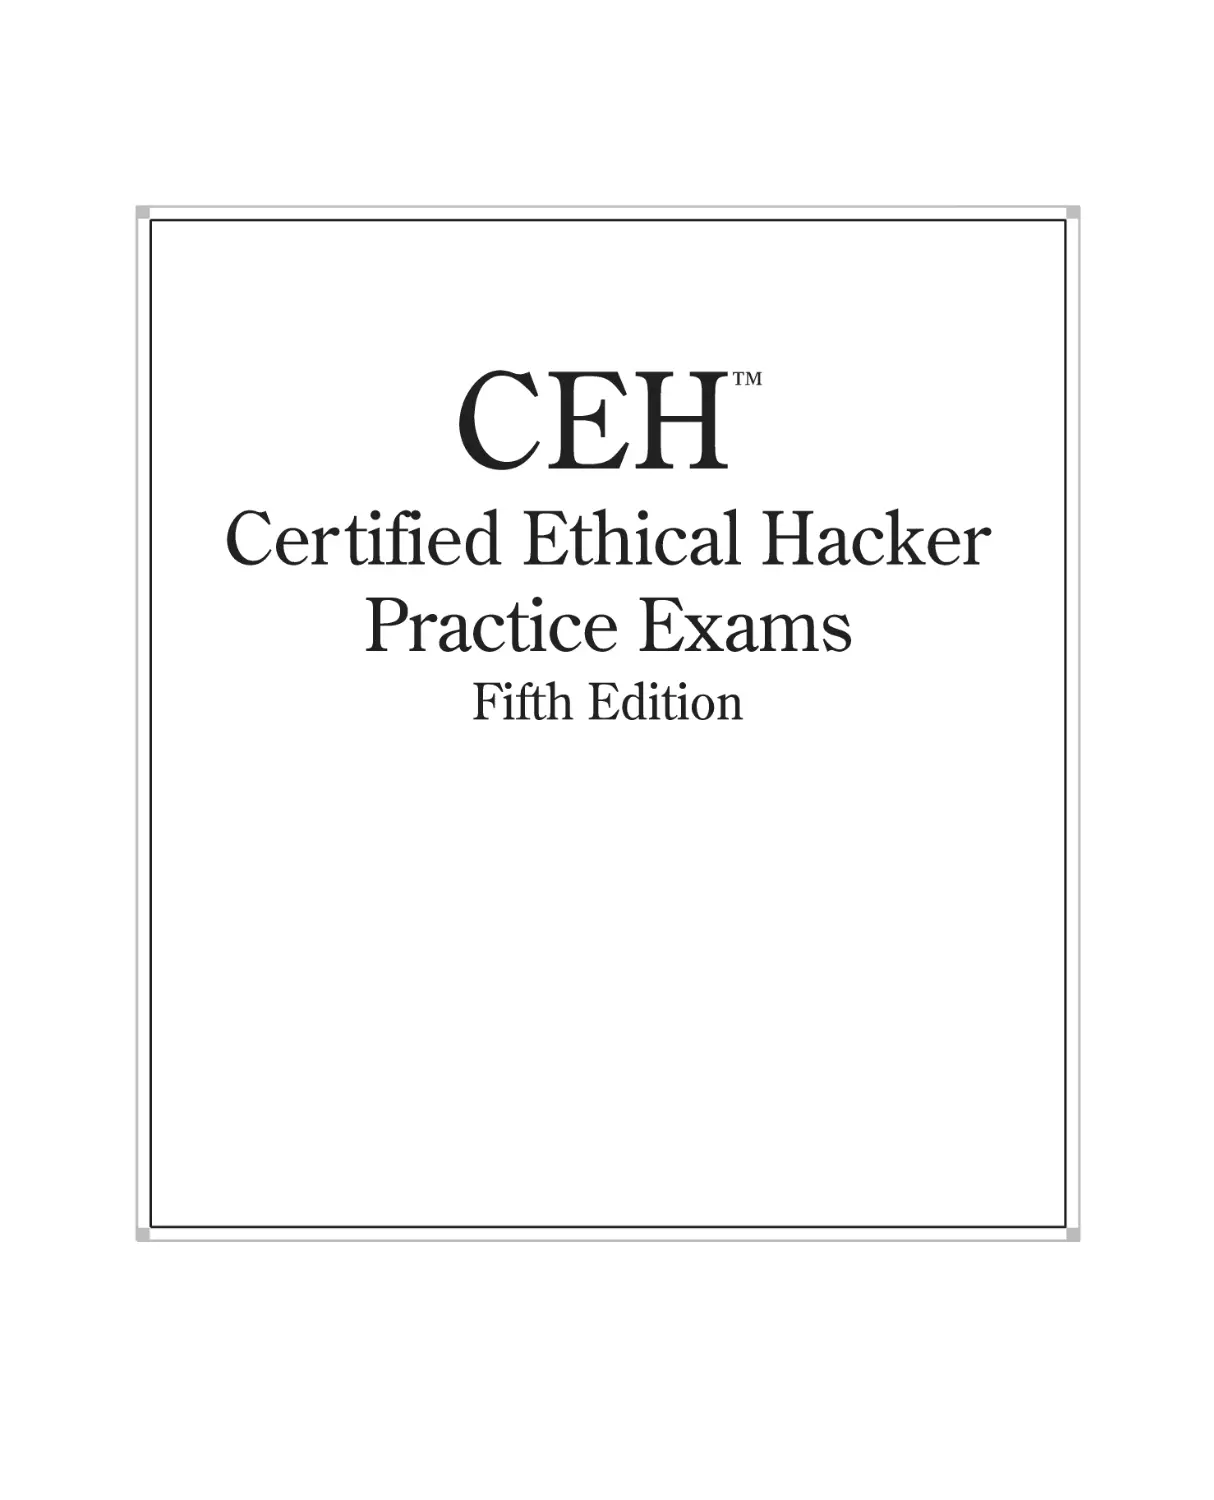 CEH™ Certified Ethical Hacker Practice Exams Fifth Edition